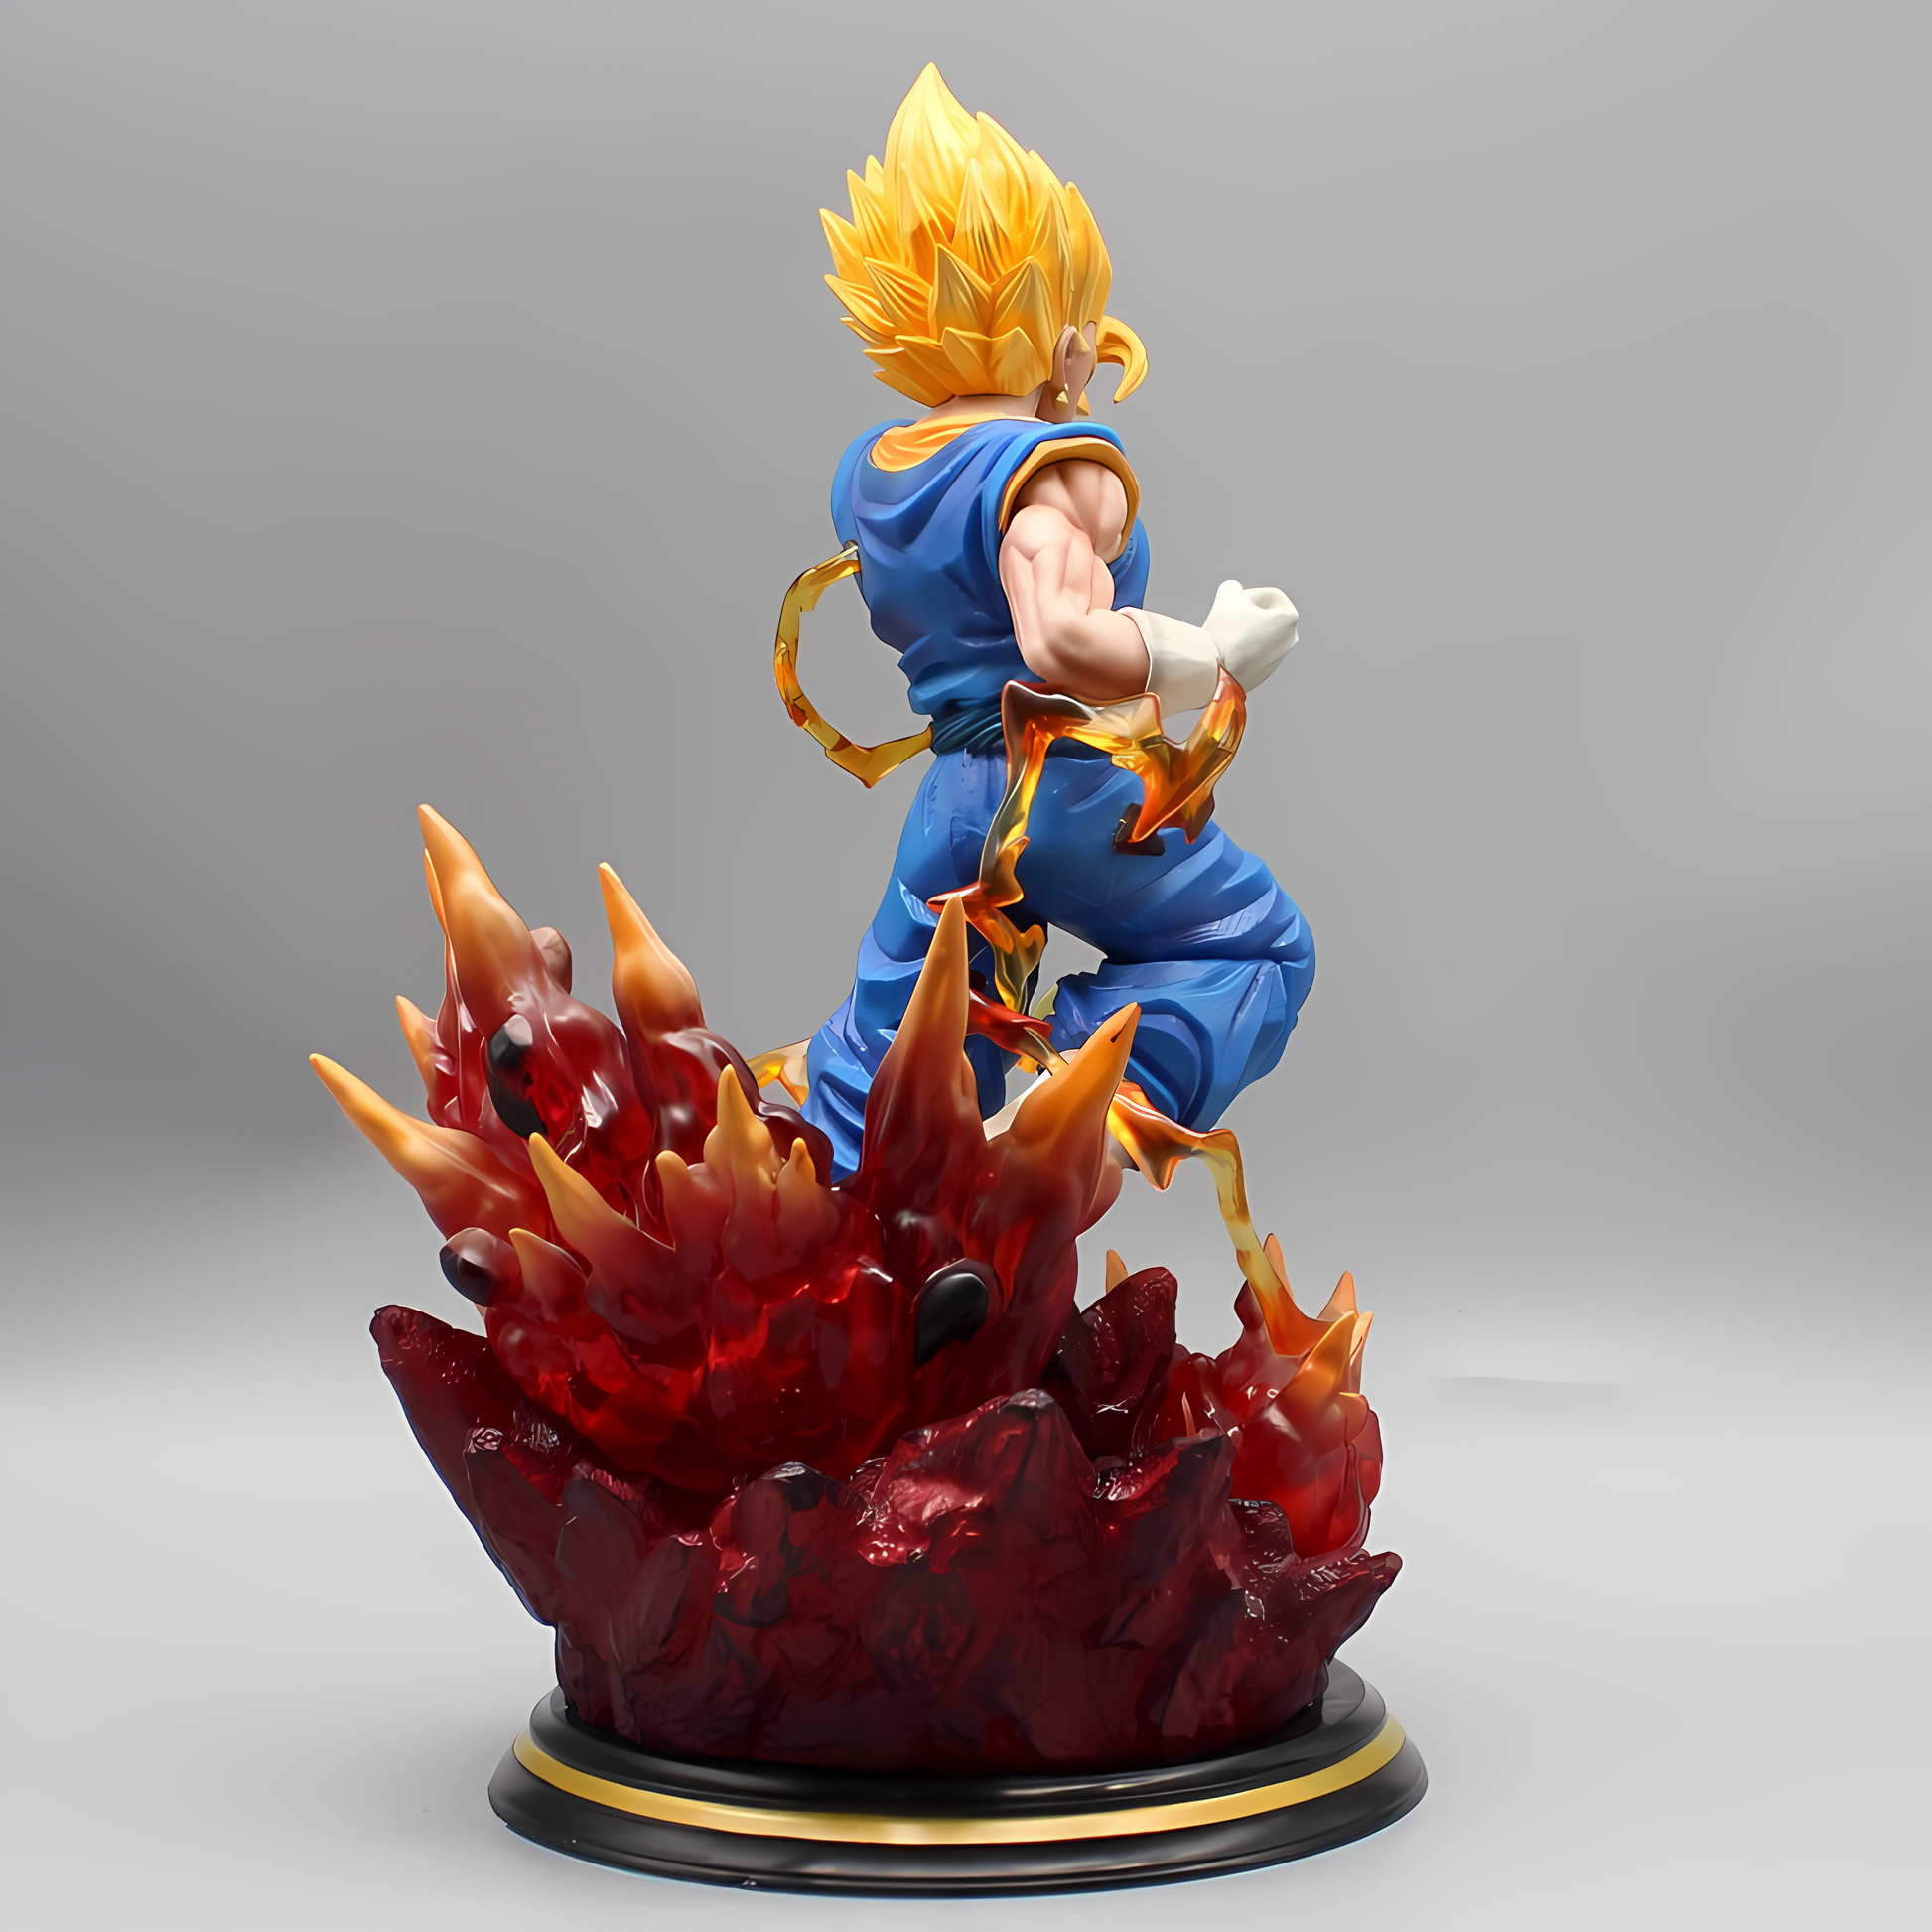 Rear perspective of Vegetto's collectible figure, emphasizing his muscular build and the Super Saiyan energy surrounding him, set upon a base of bursting flames.